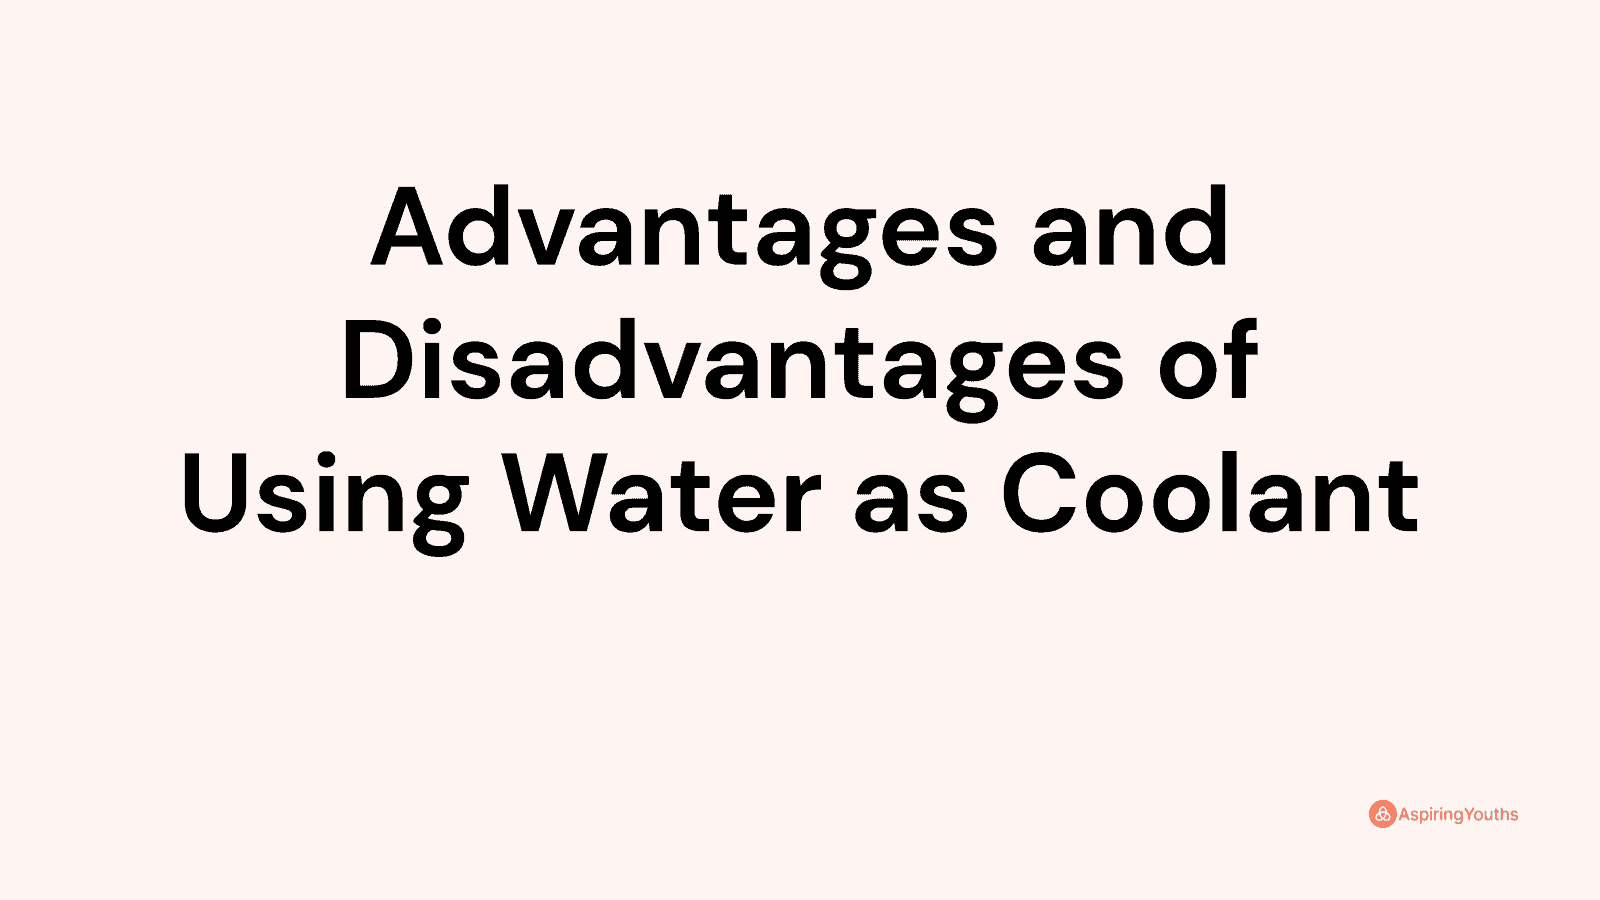 Advantages and disadvantages of Using Water as Coolant